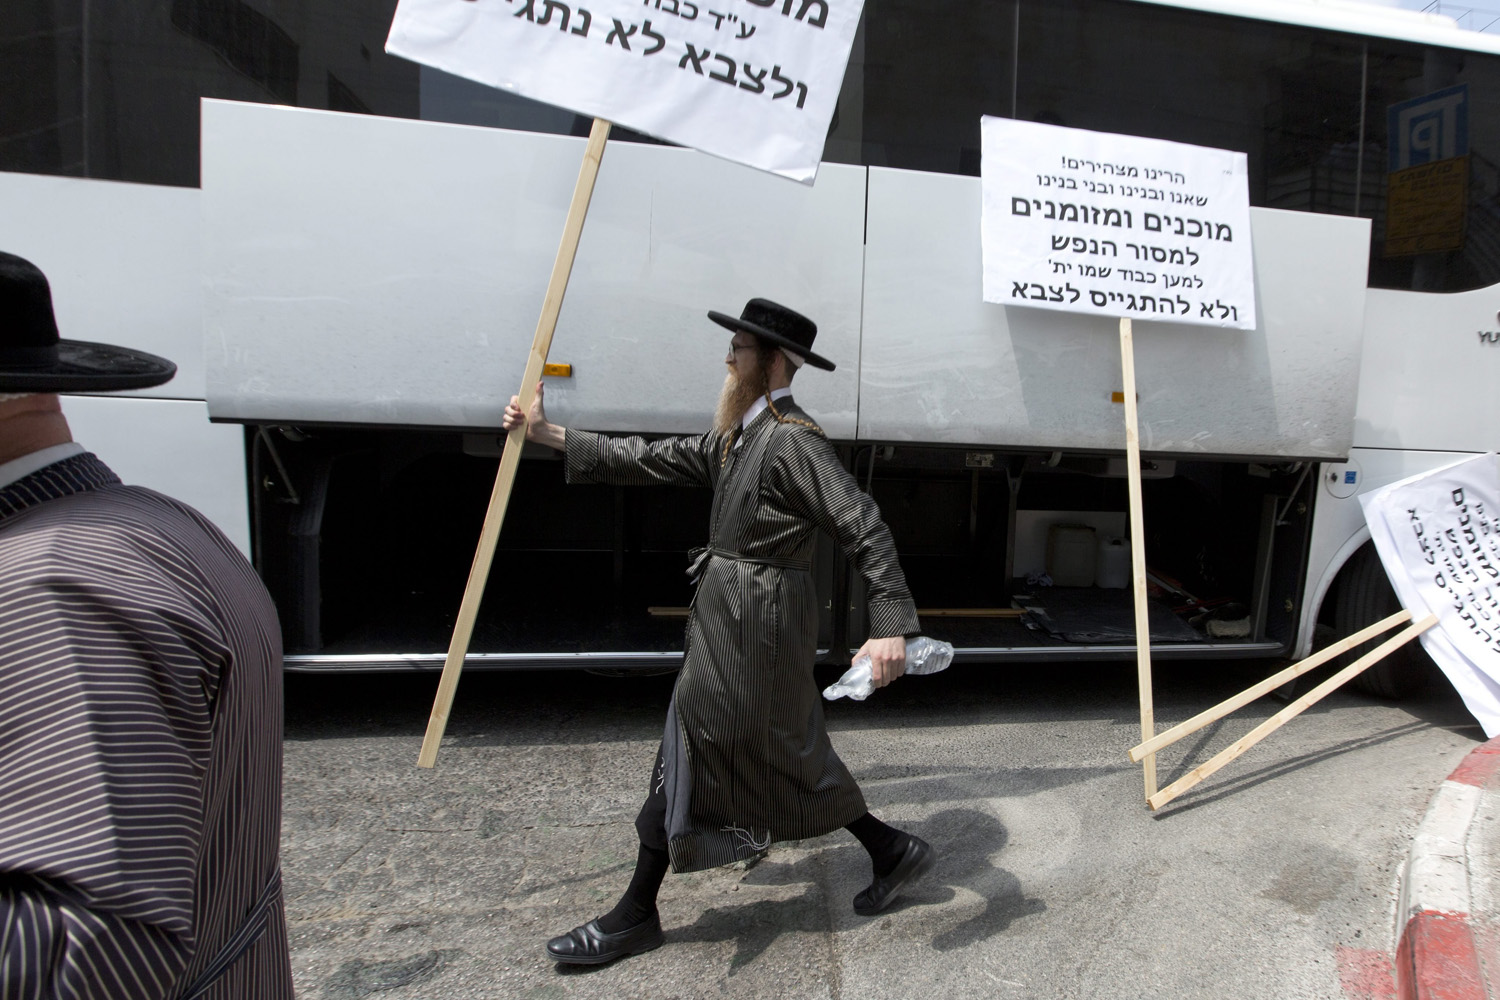 Ultra Orthodox Jewish protest in Jerusalem against army conscription